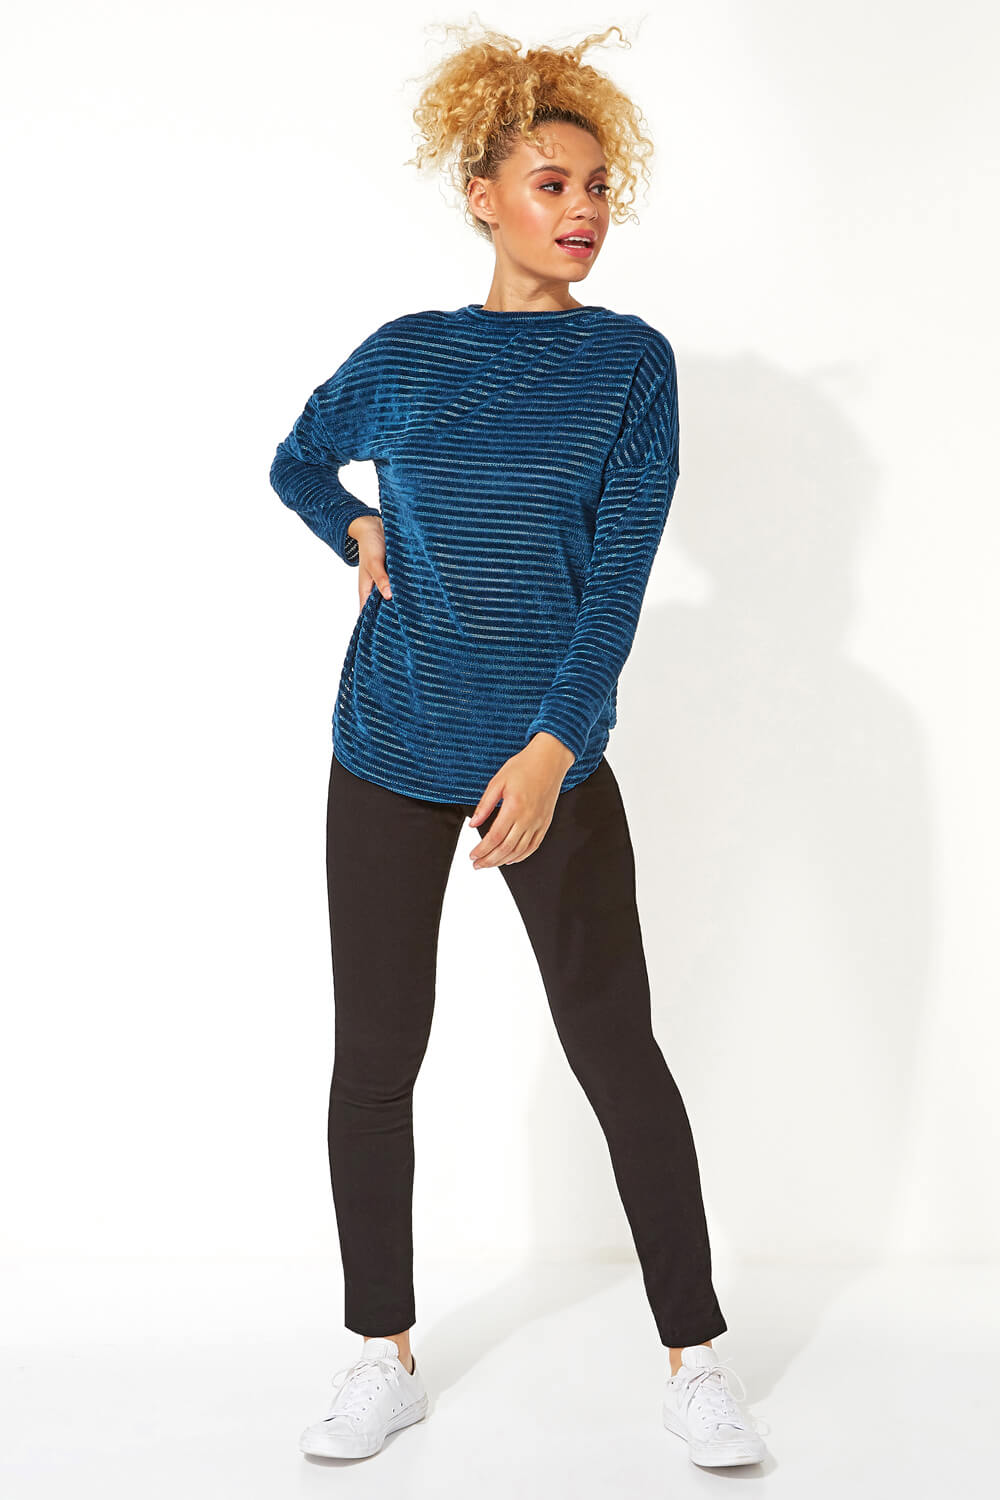 Teal Chenille Stripe Long Sleeve Top, Image 2 of 5